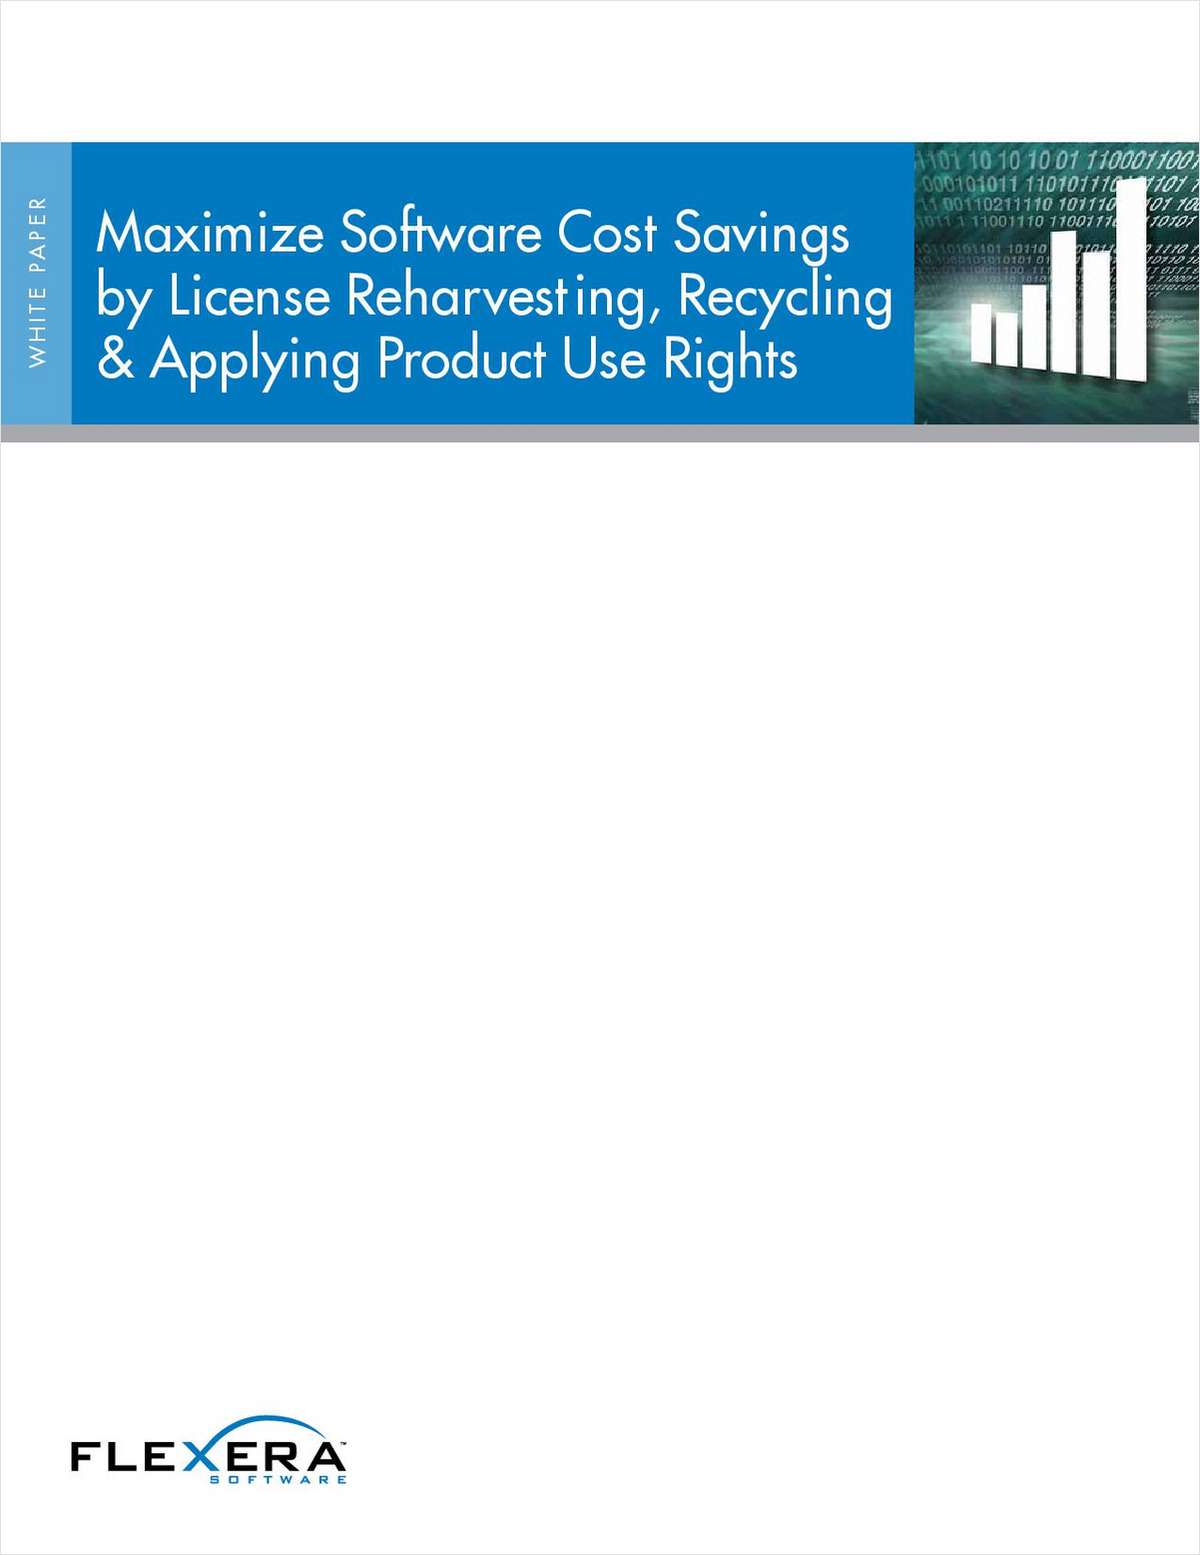 Save Time and Money by Managing Your Application Usage